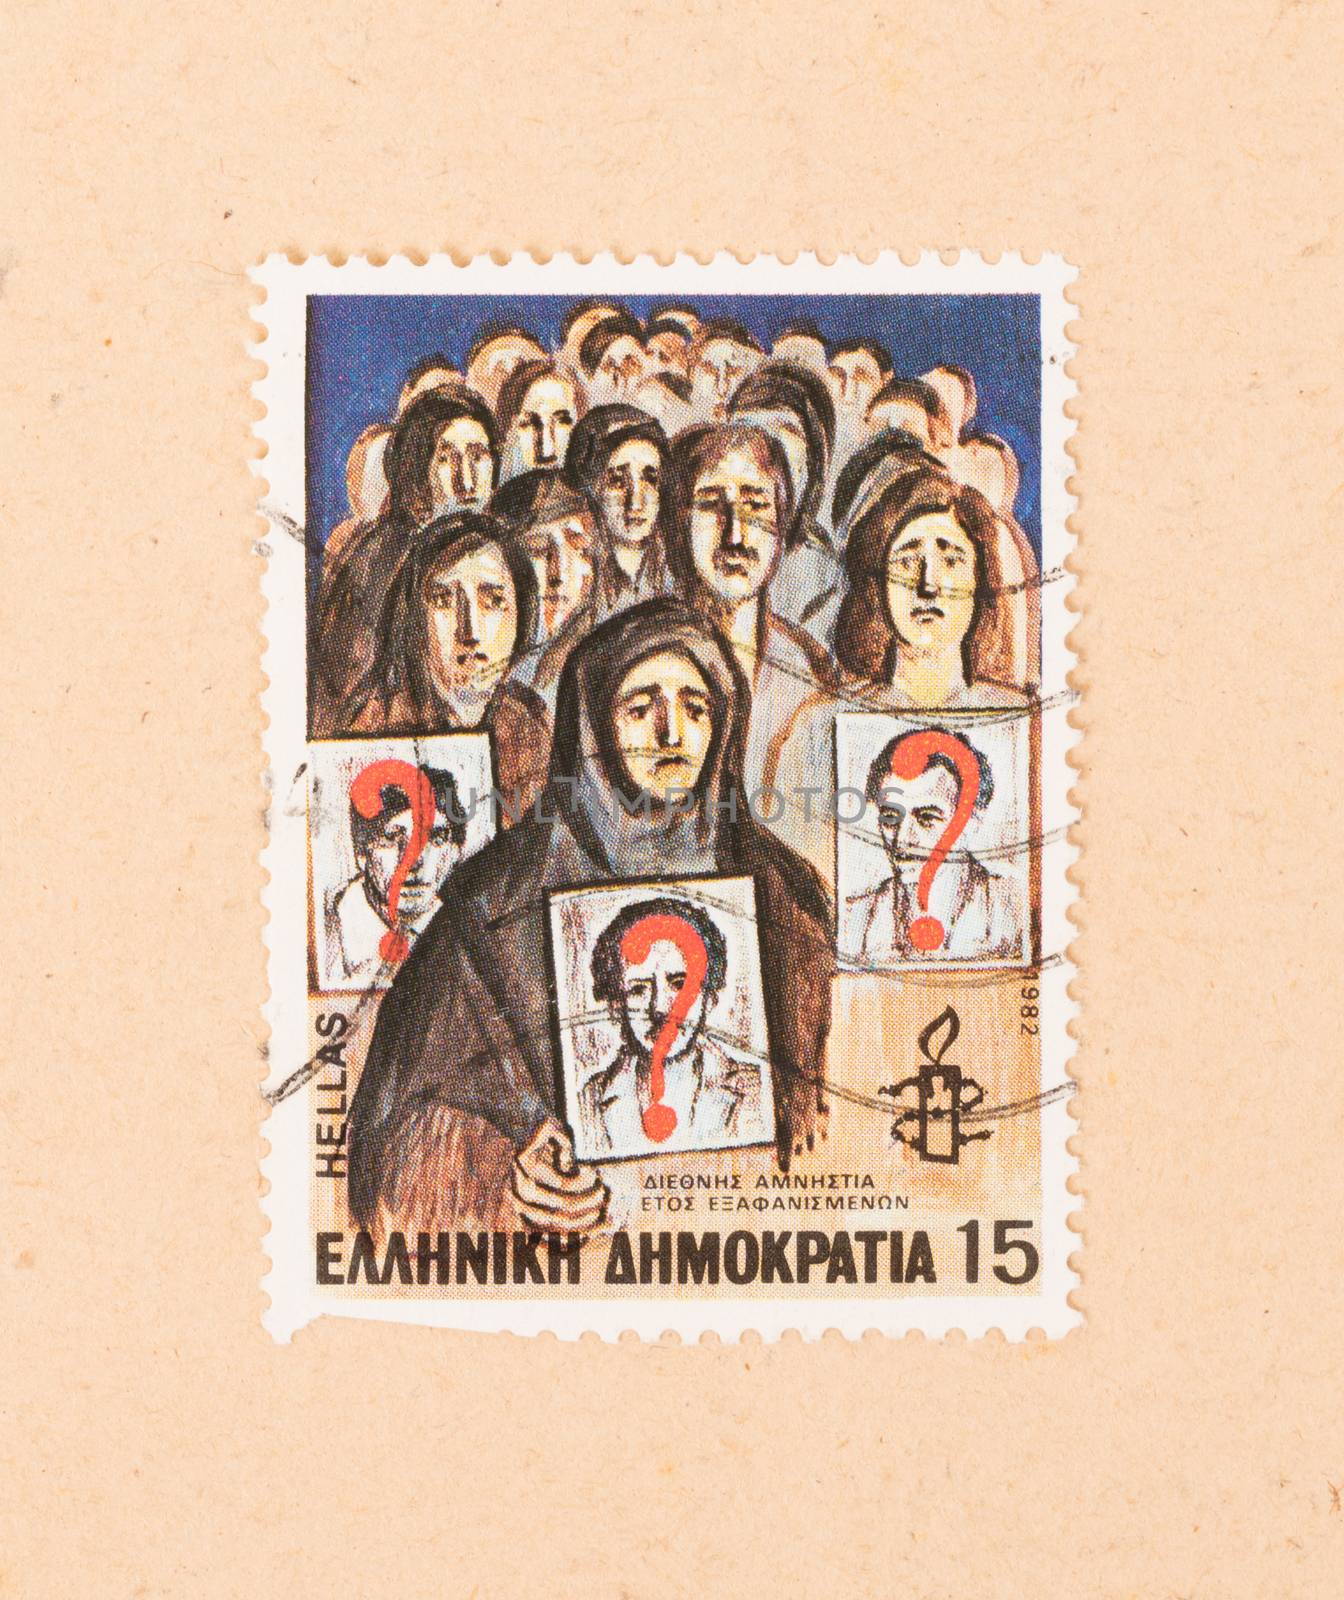 GREECE - CIRCA 1982: A stamp printed in Greece shows an image of by michaklootwijk